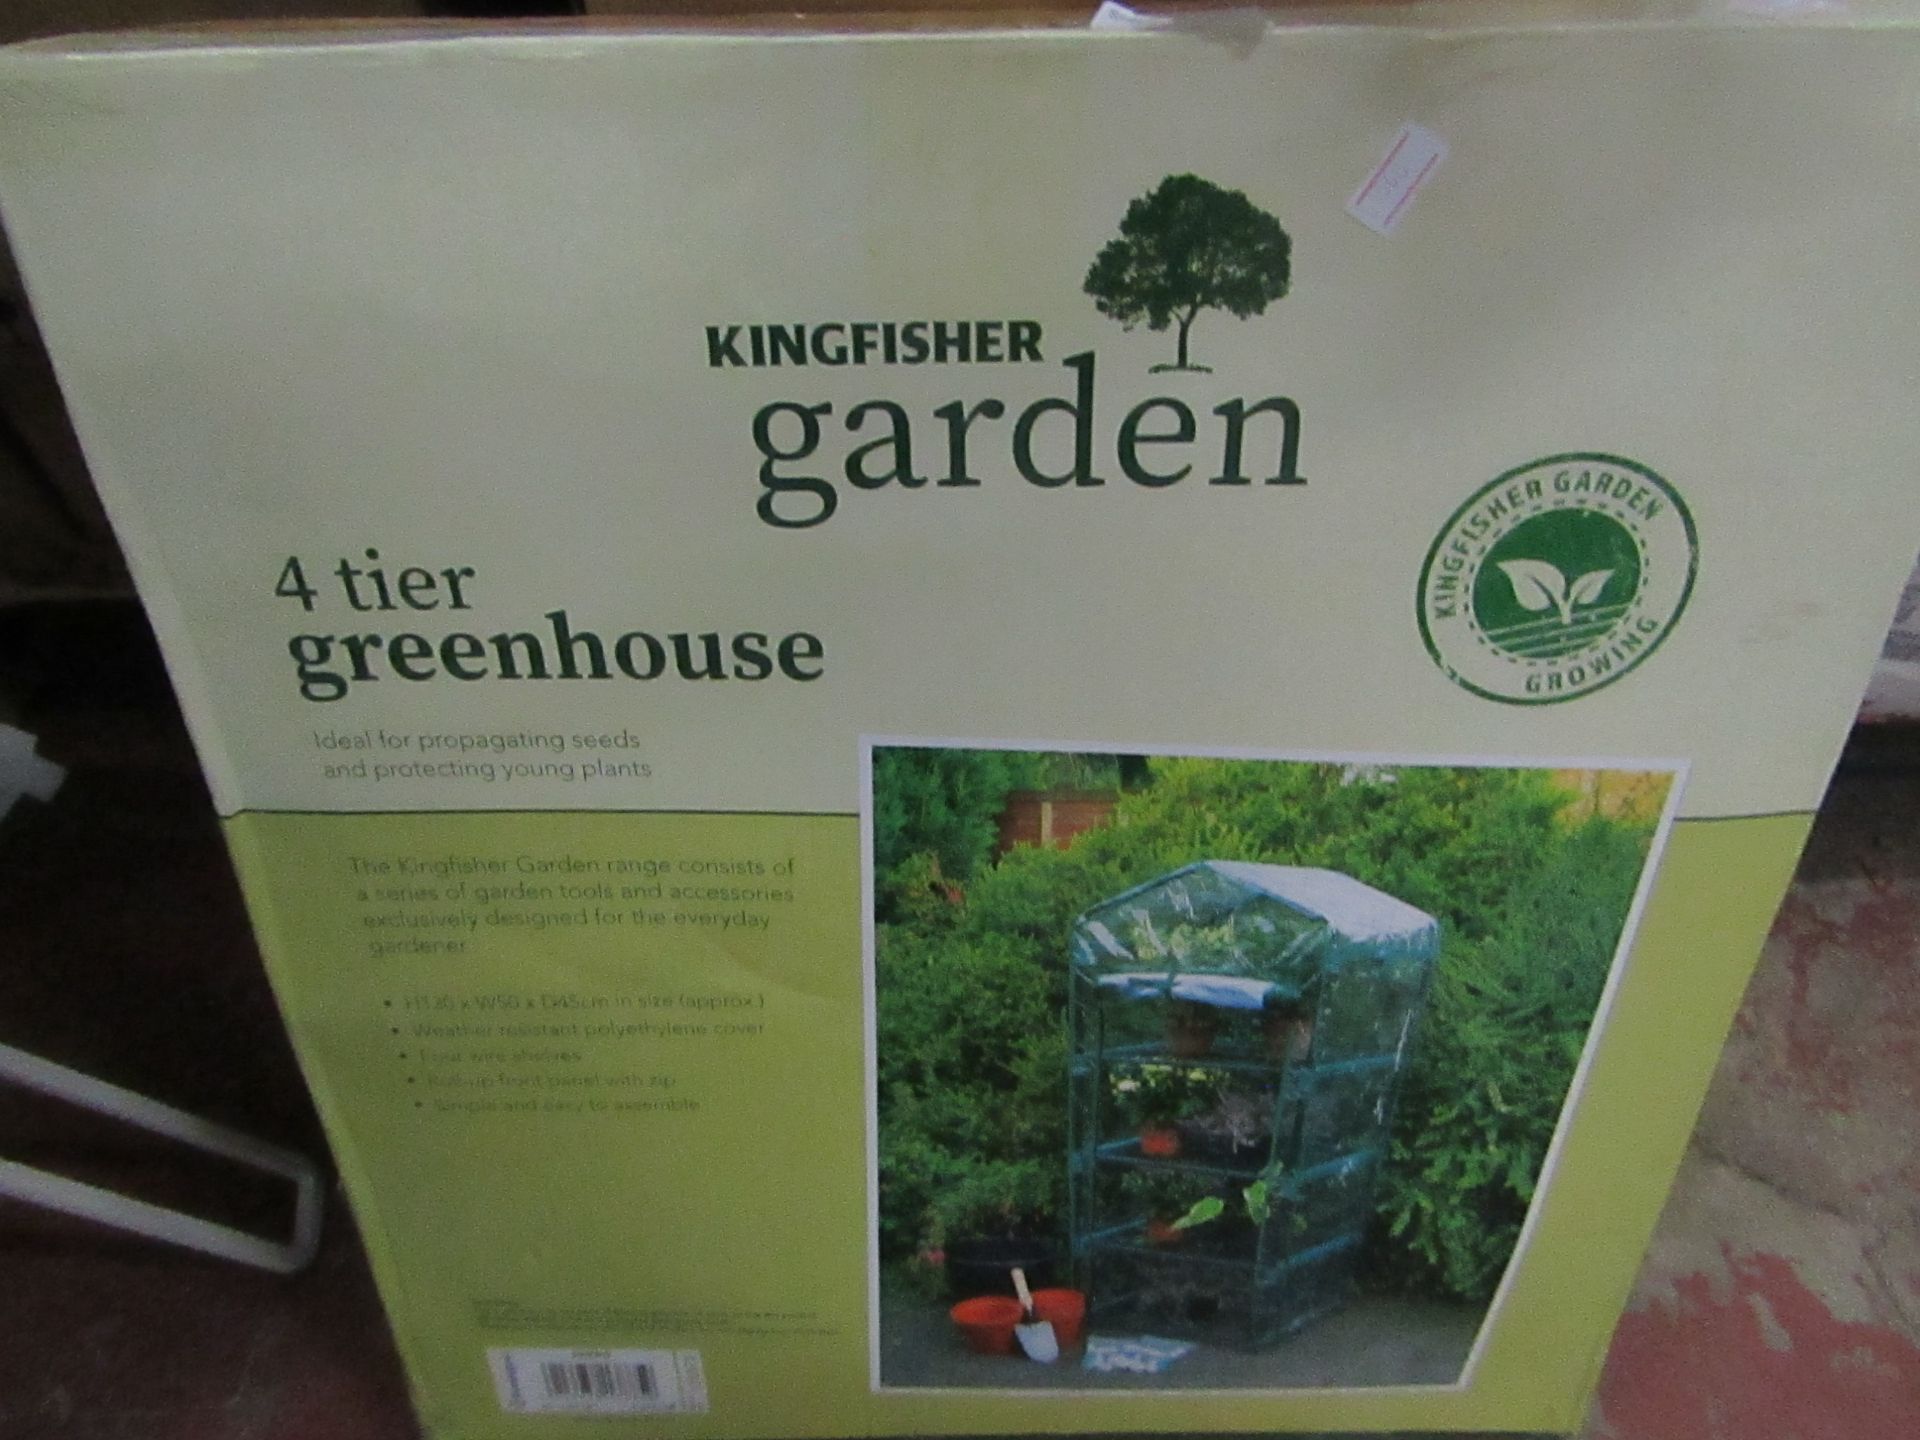 Kingfisher Garden 4 Tier Greenhouse. Boxed but unchecked